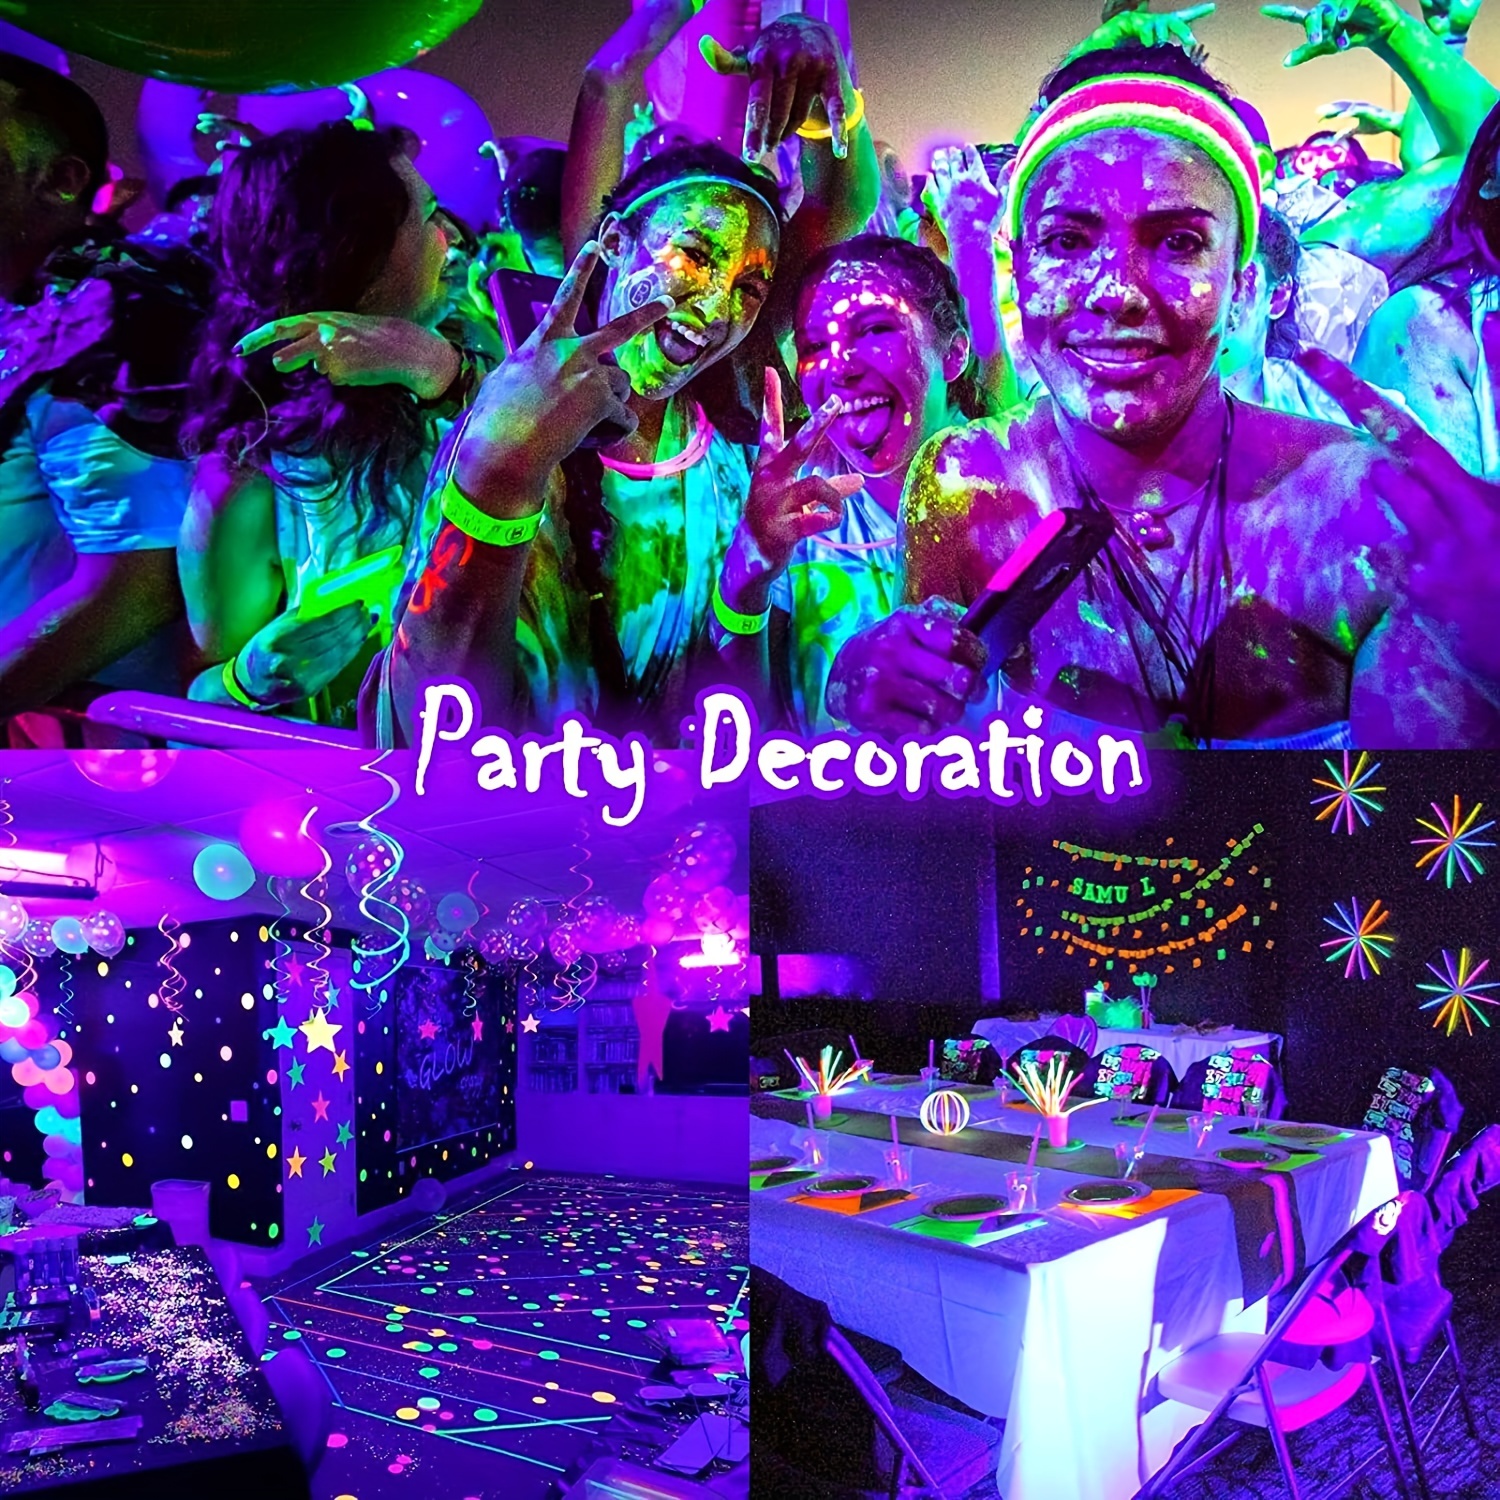 How to make a black light with your phone - Black light LED glow party kits  UV ultra violet lights neon party